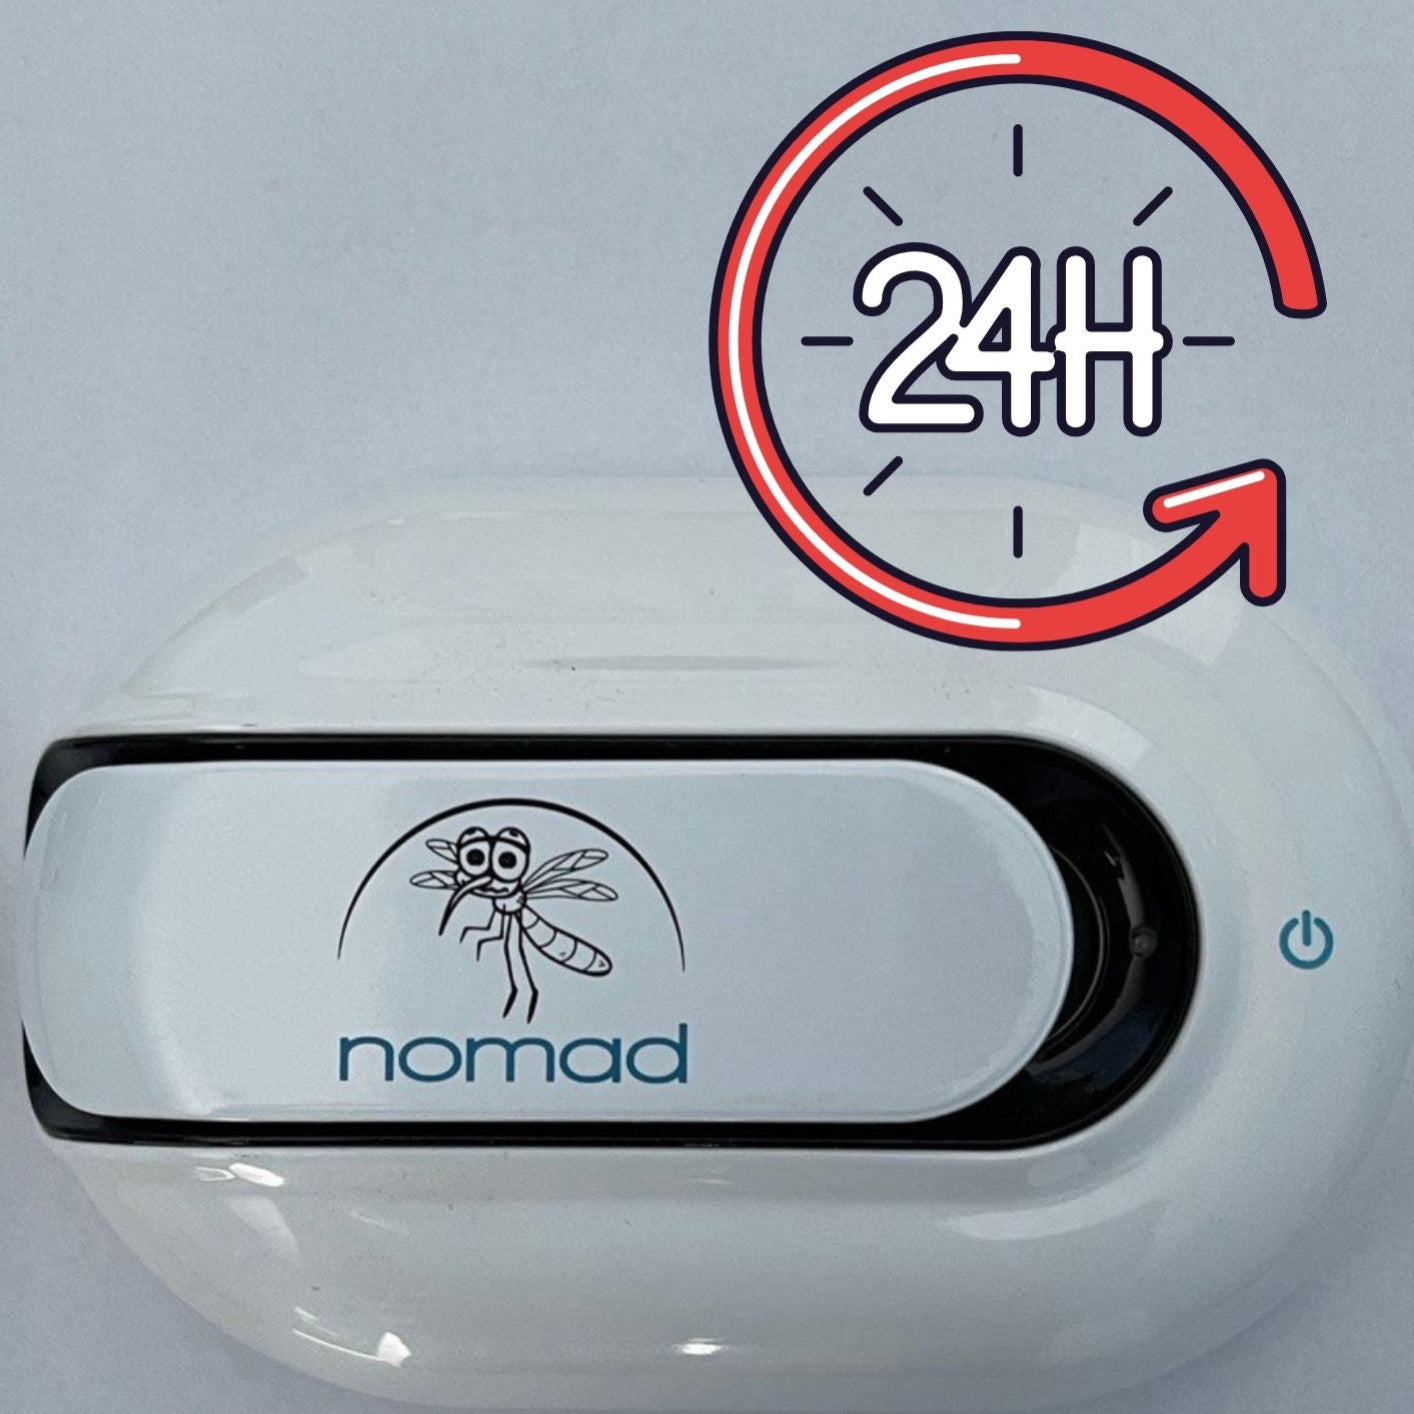 Nomad: Electronic Mosquito Protector